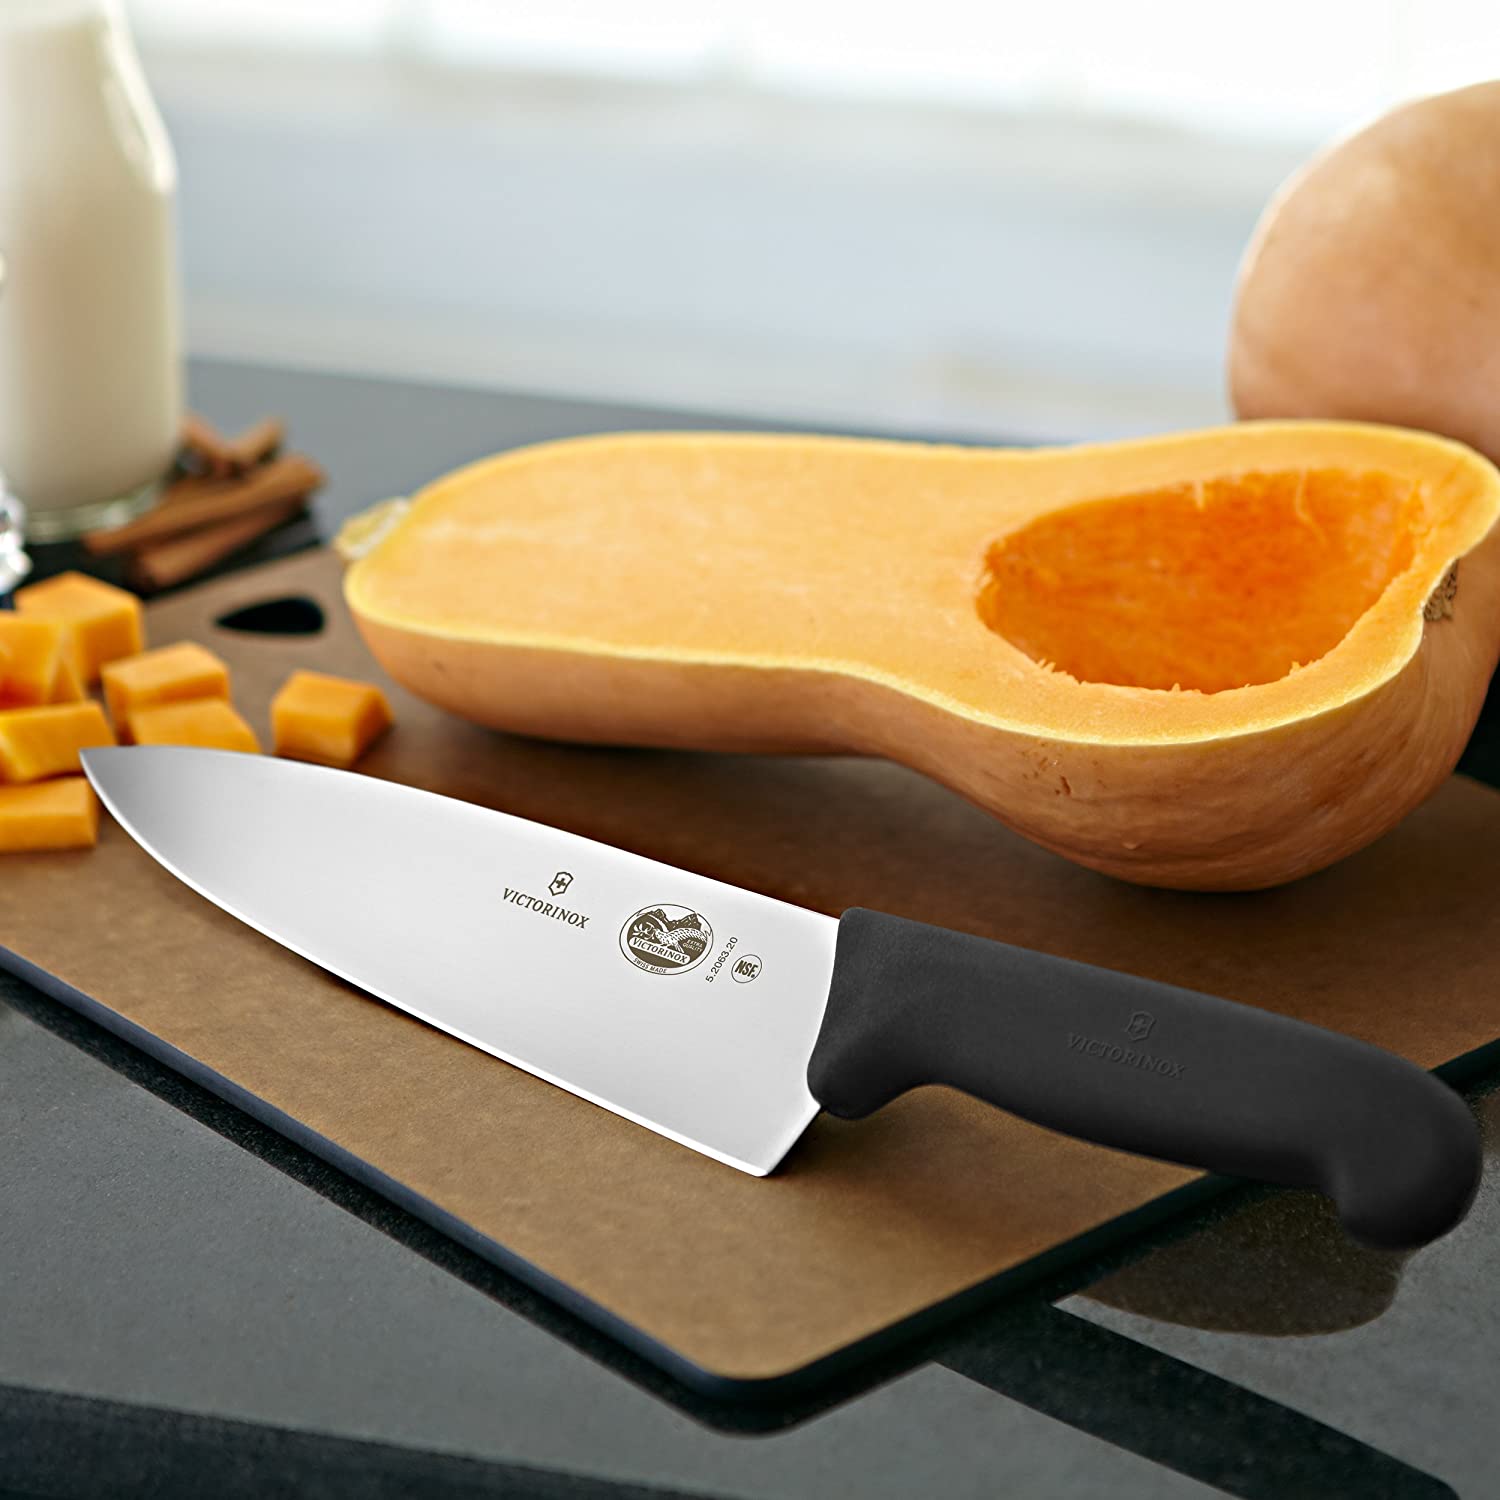 The 6 best kitchen knives we tested